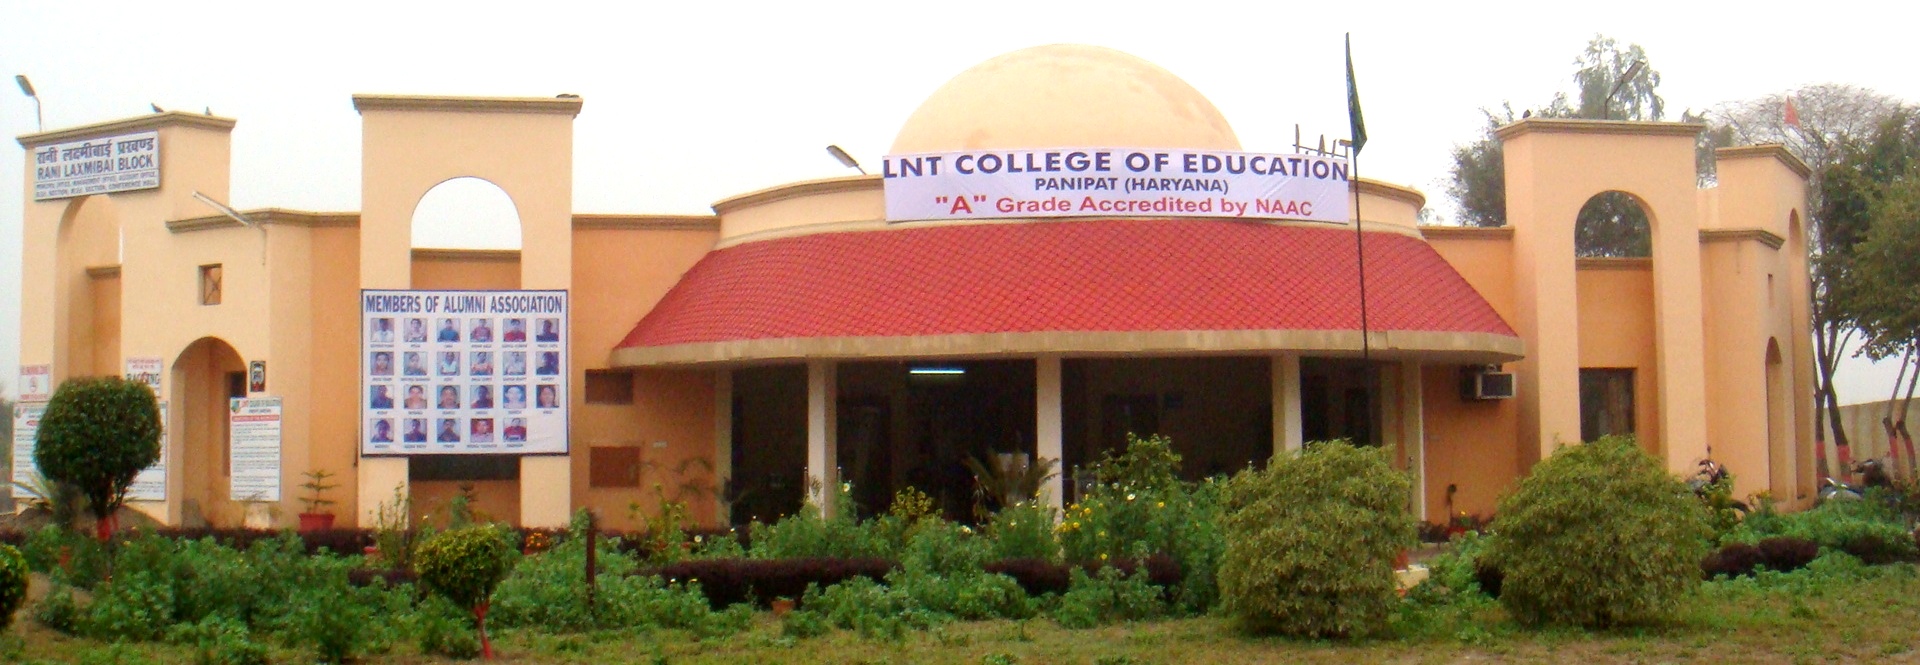 Brief History of Laxmi Narayan Tayal College of Education, Panipat Welcome to LNT College of Education 